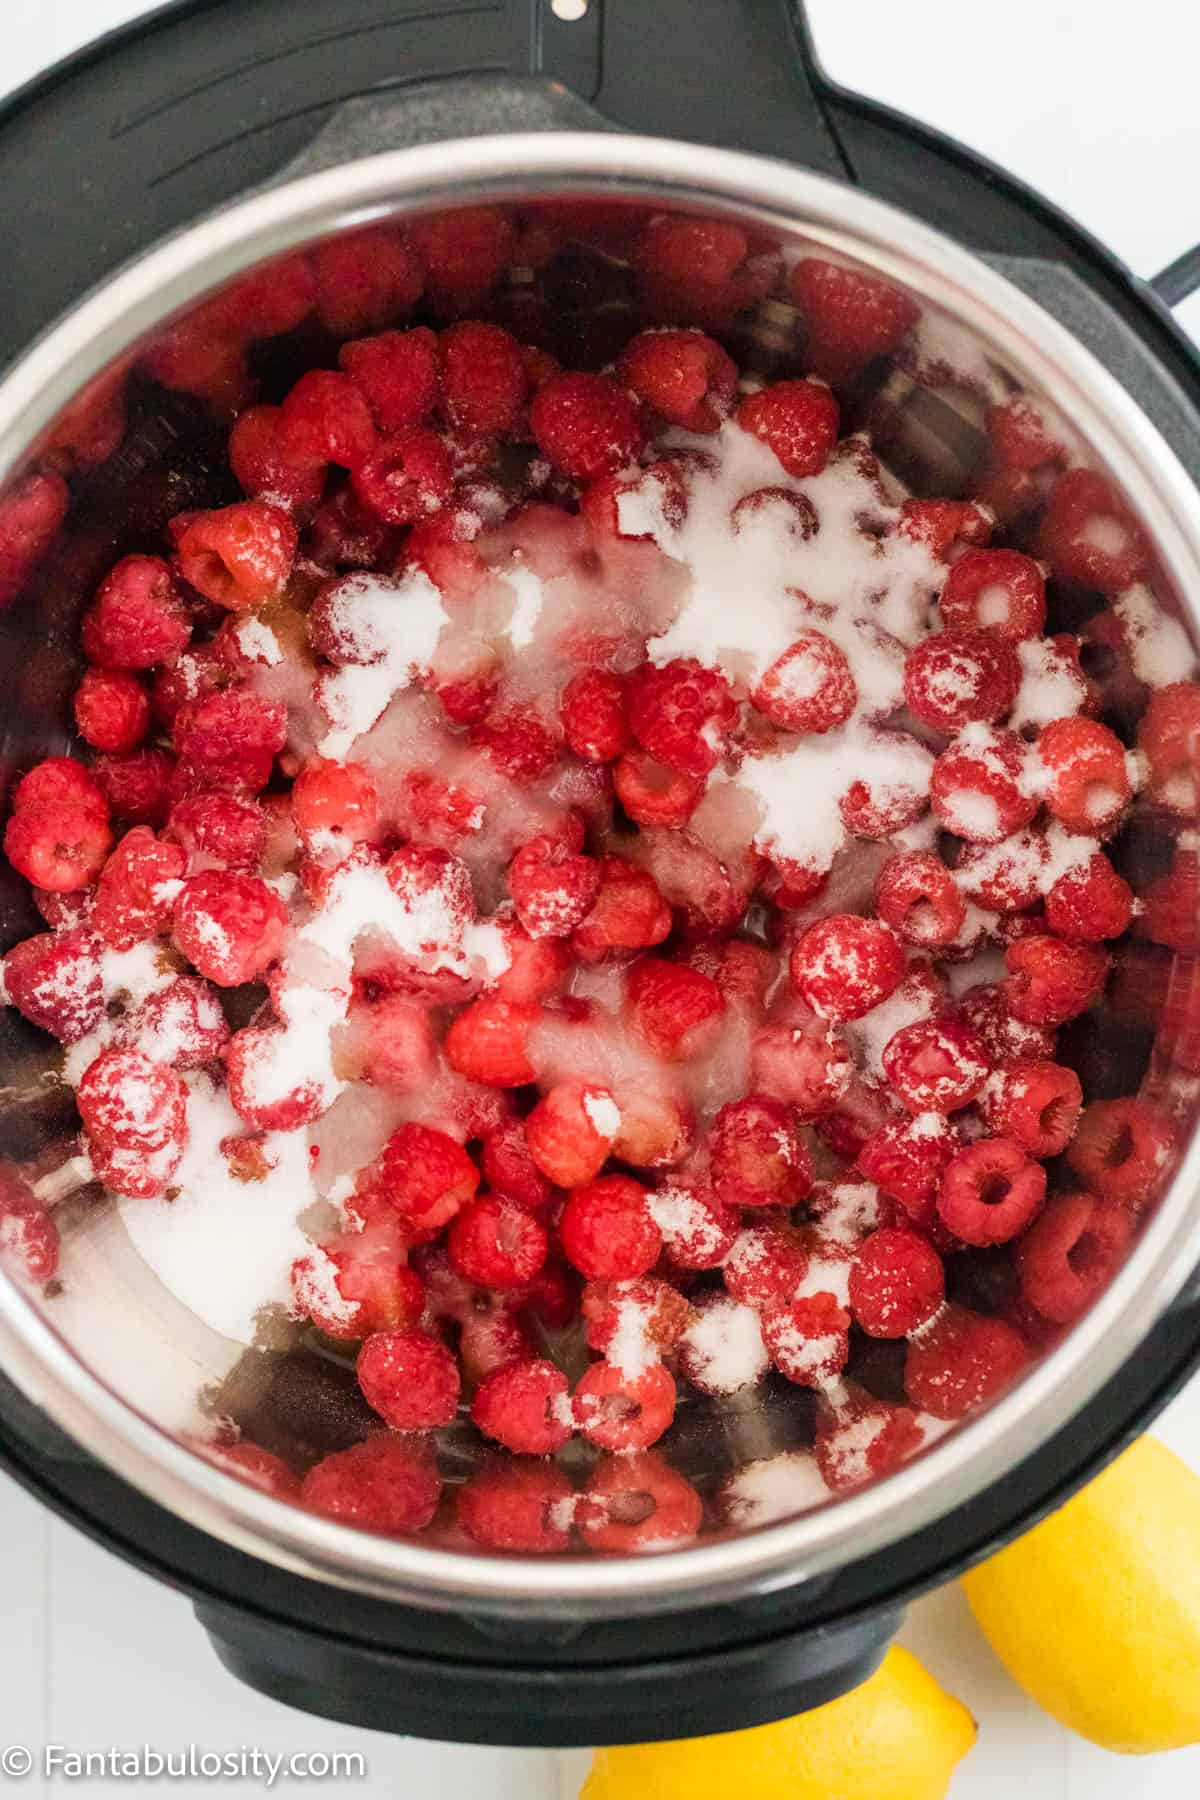 The inside of an Instant Pot pressure cooker is filled with fresh raspberries, sugar and lemon juice ready to make Instant Pot raspberry jam